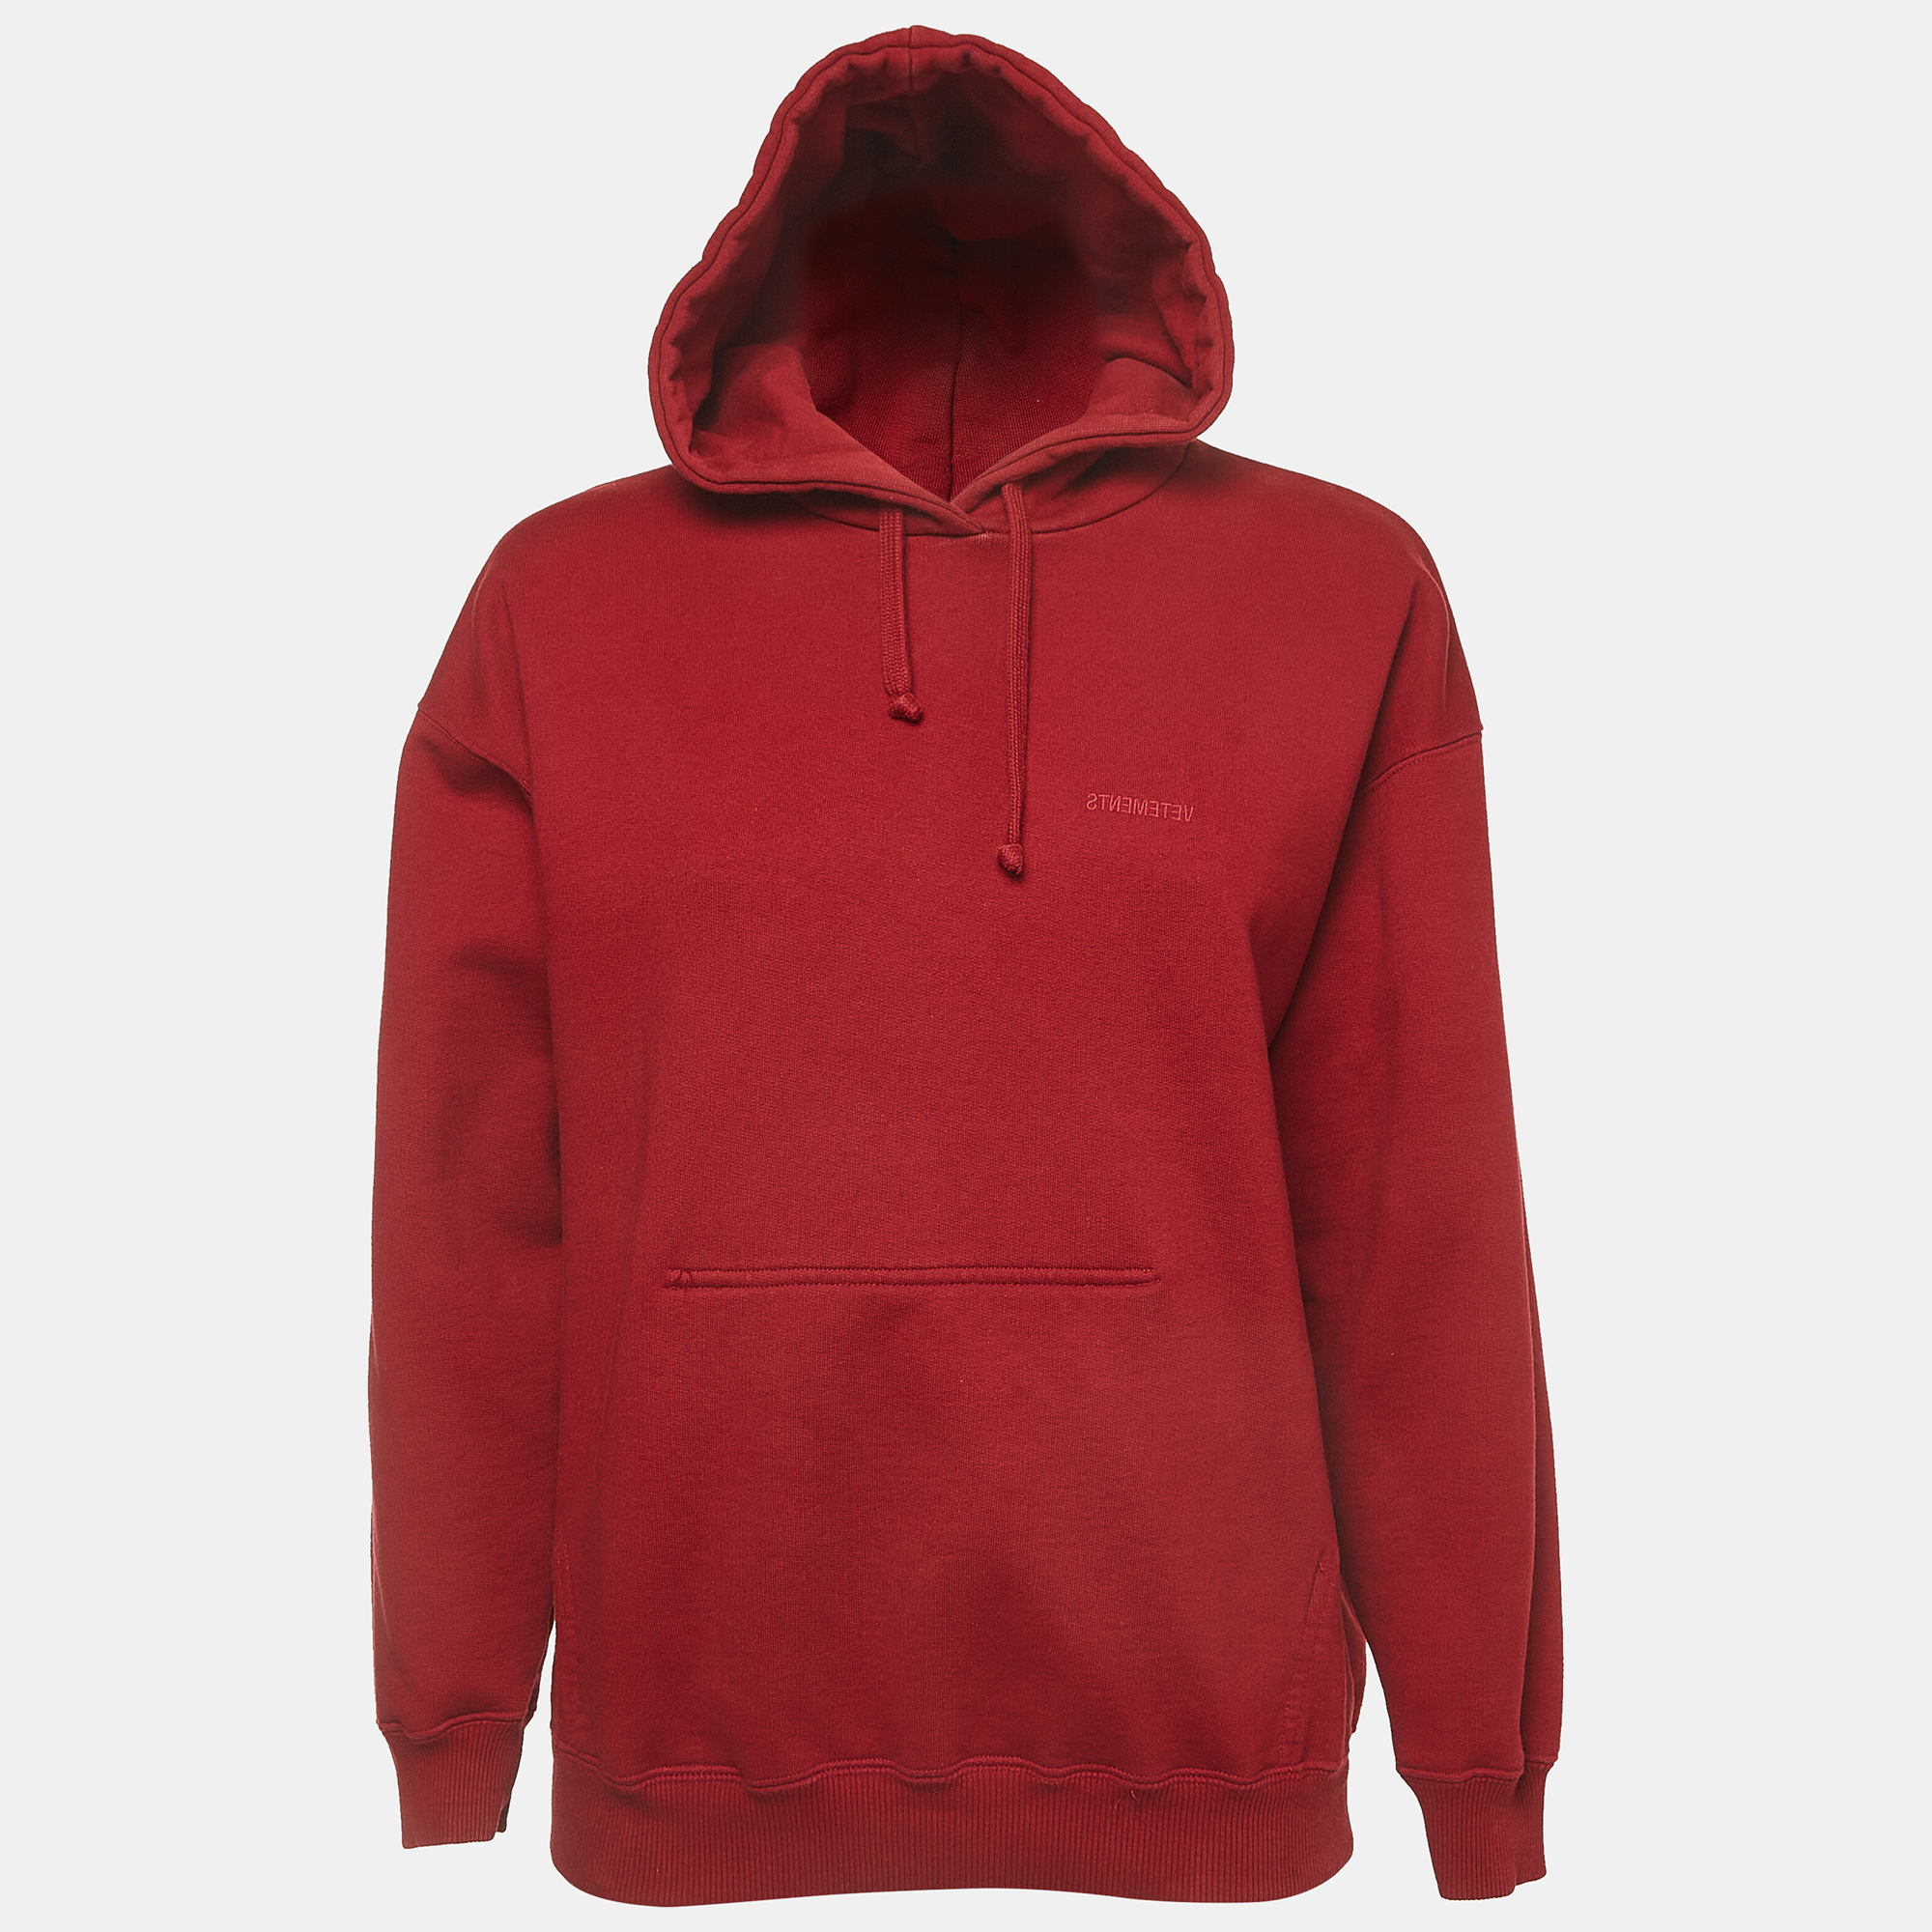 Vetements Red Cotton Blend Knit Inside-Out Hoodiet XS